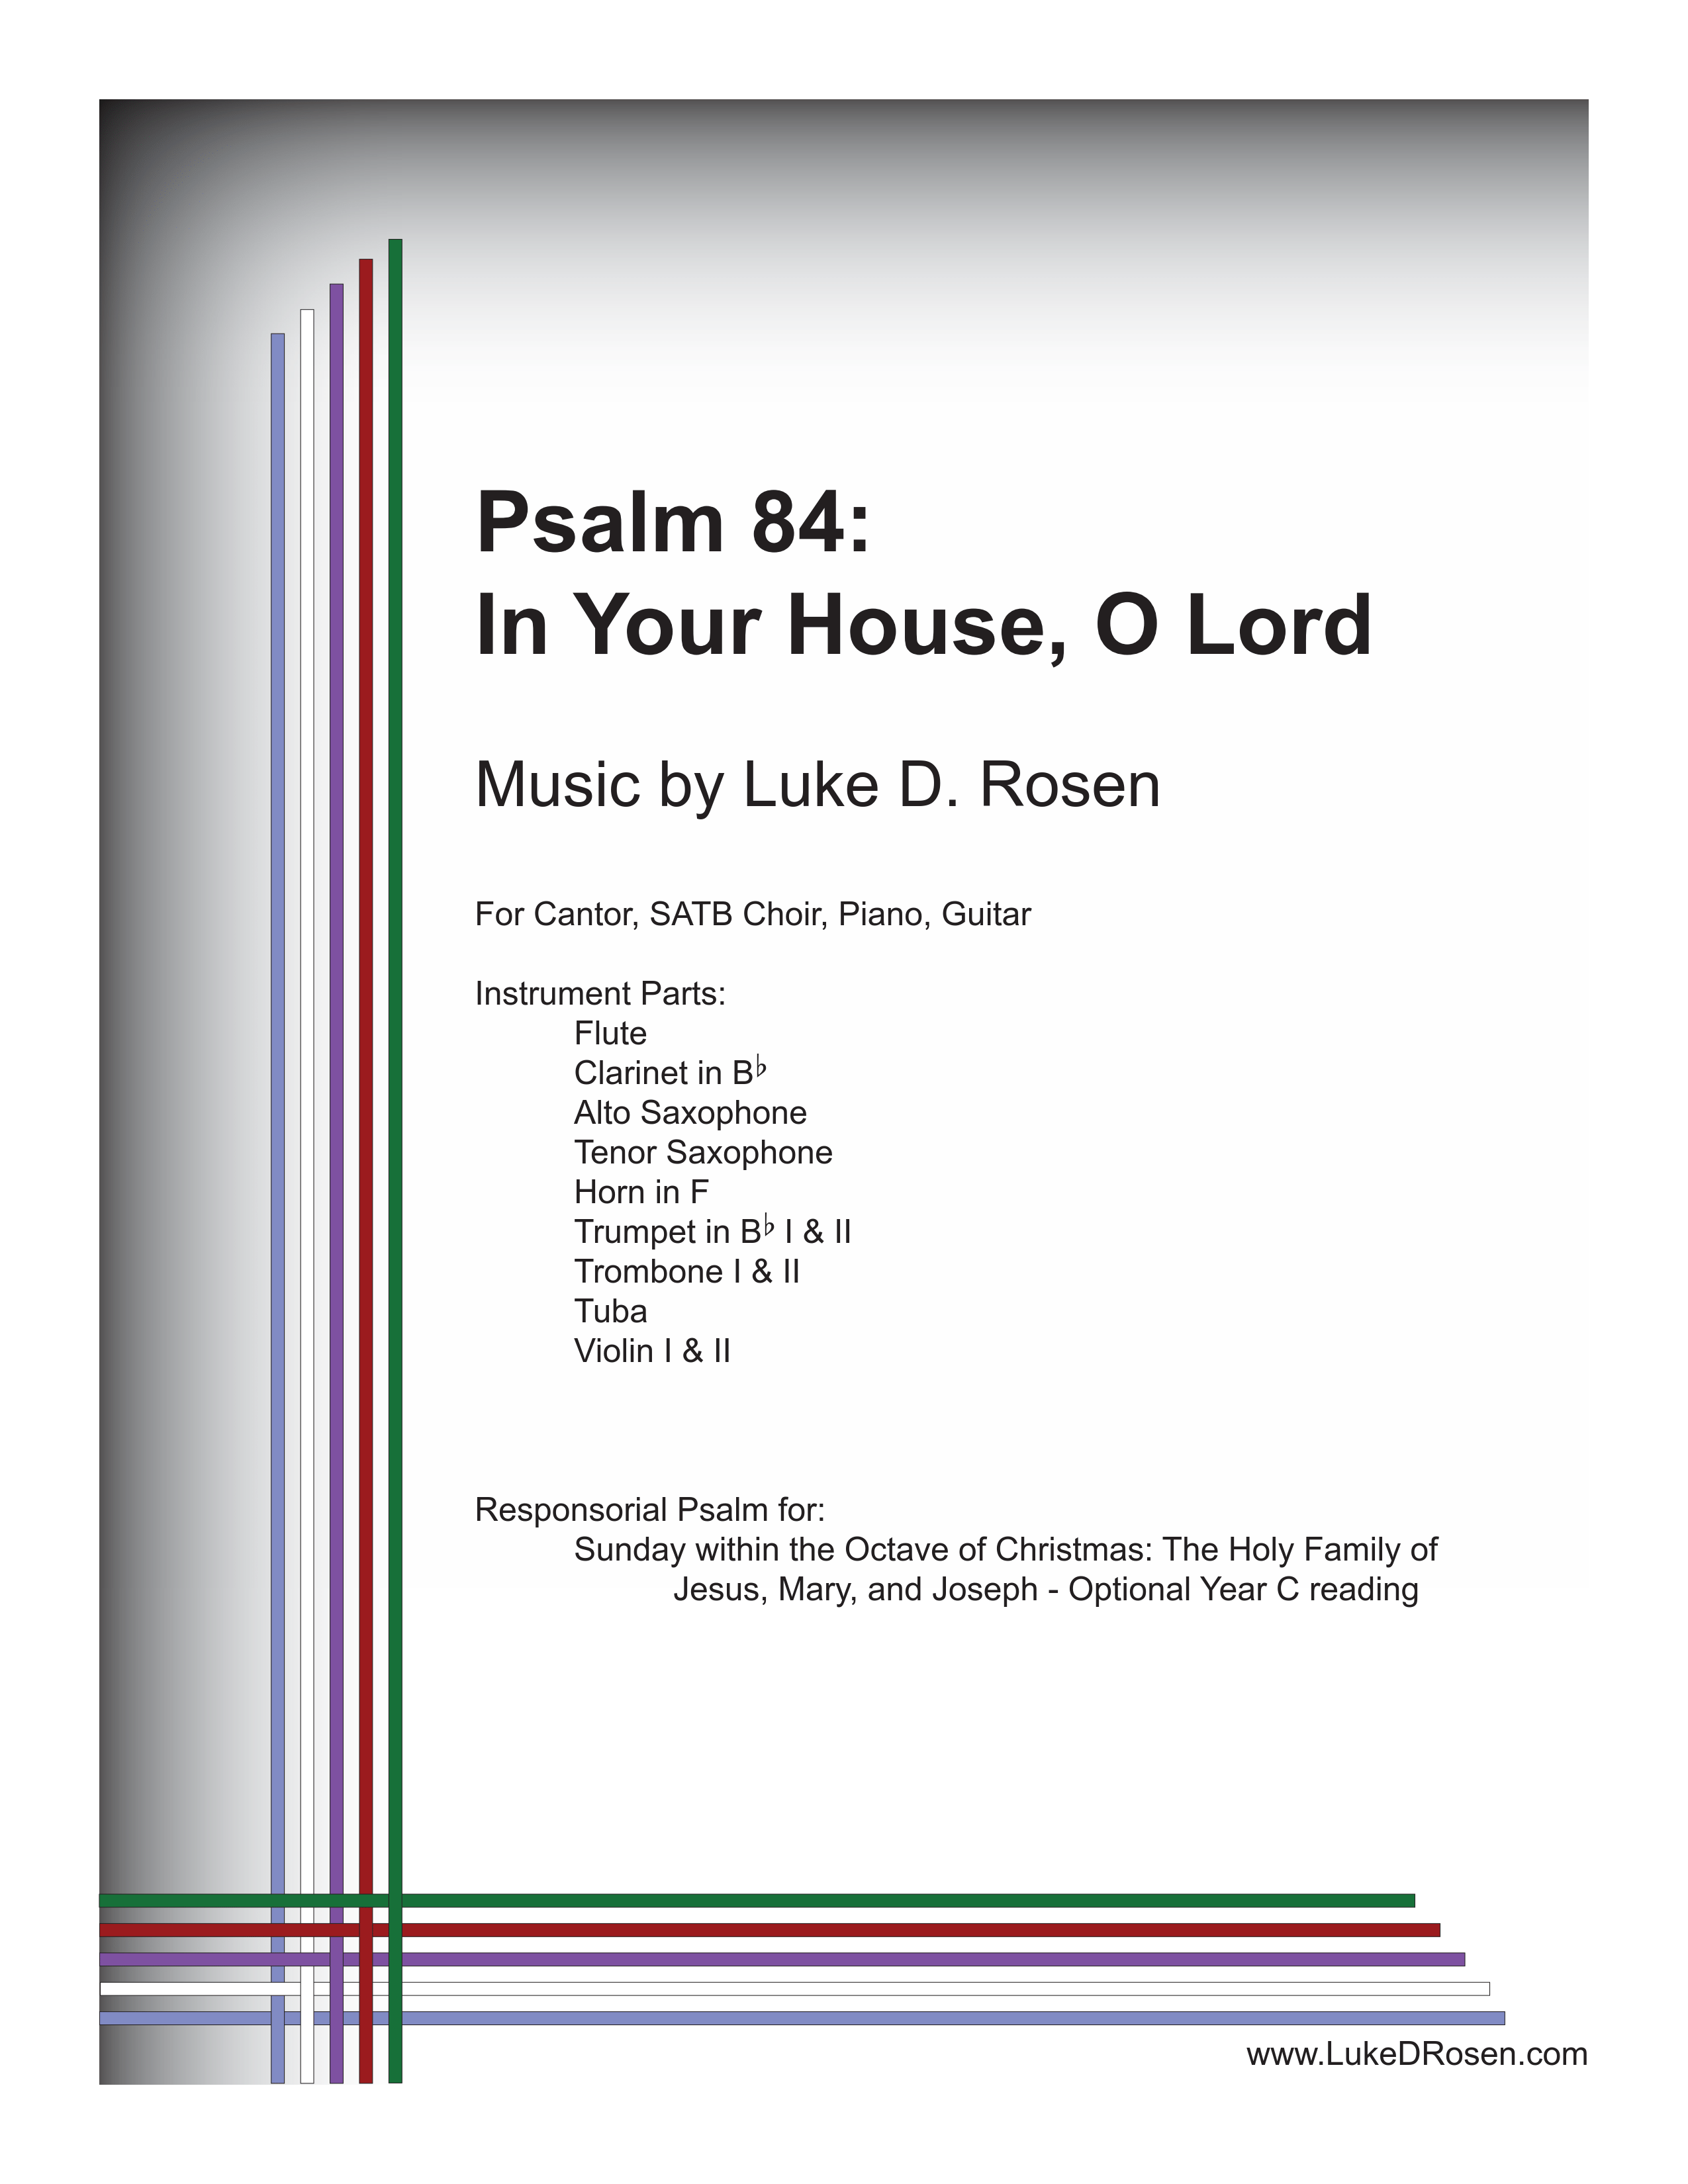 Psalm 84 – In Your House, O Lord (Rosen)